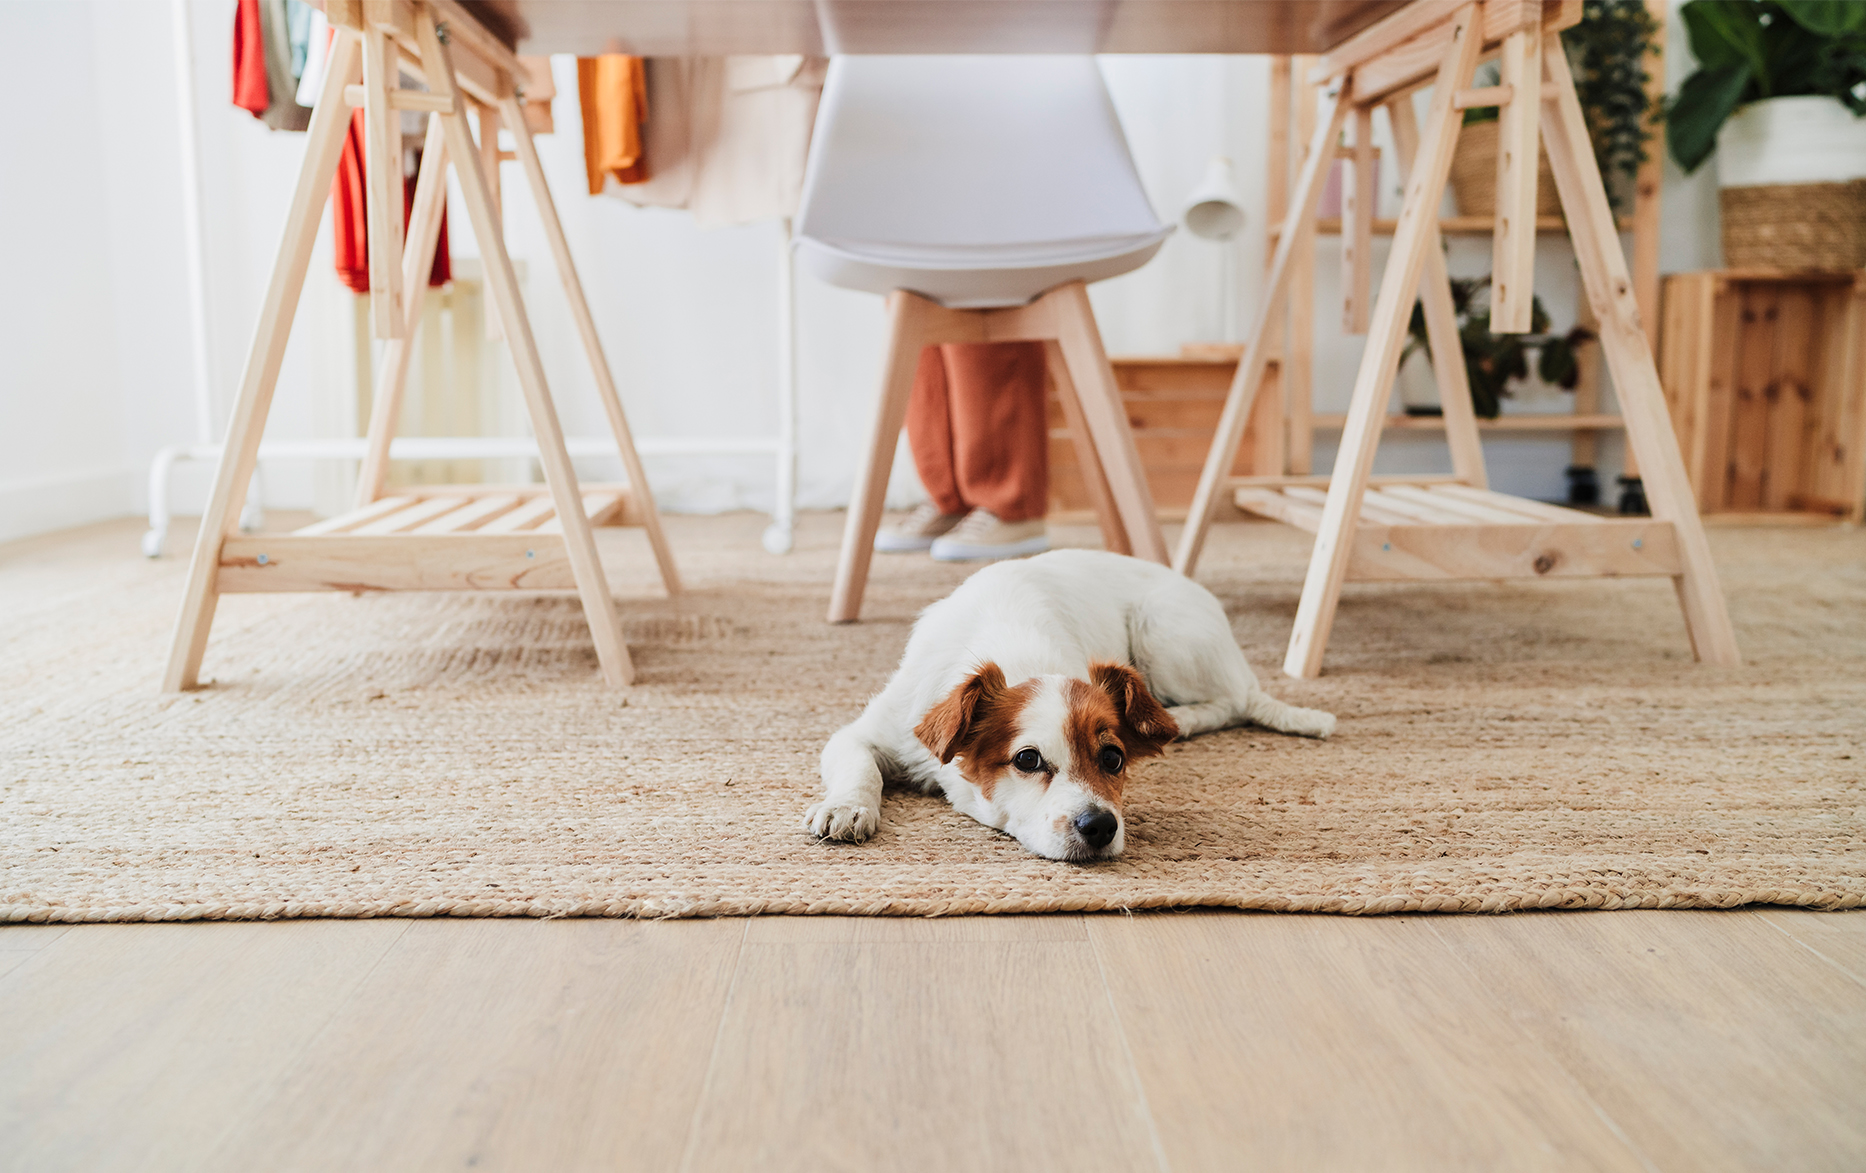 How to Clean Dog Vomit on Wood Floors